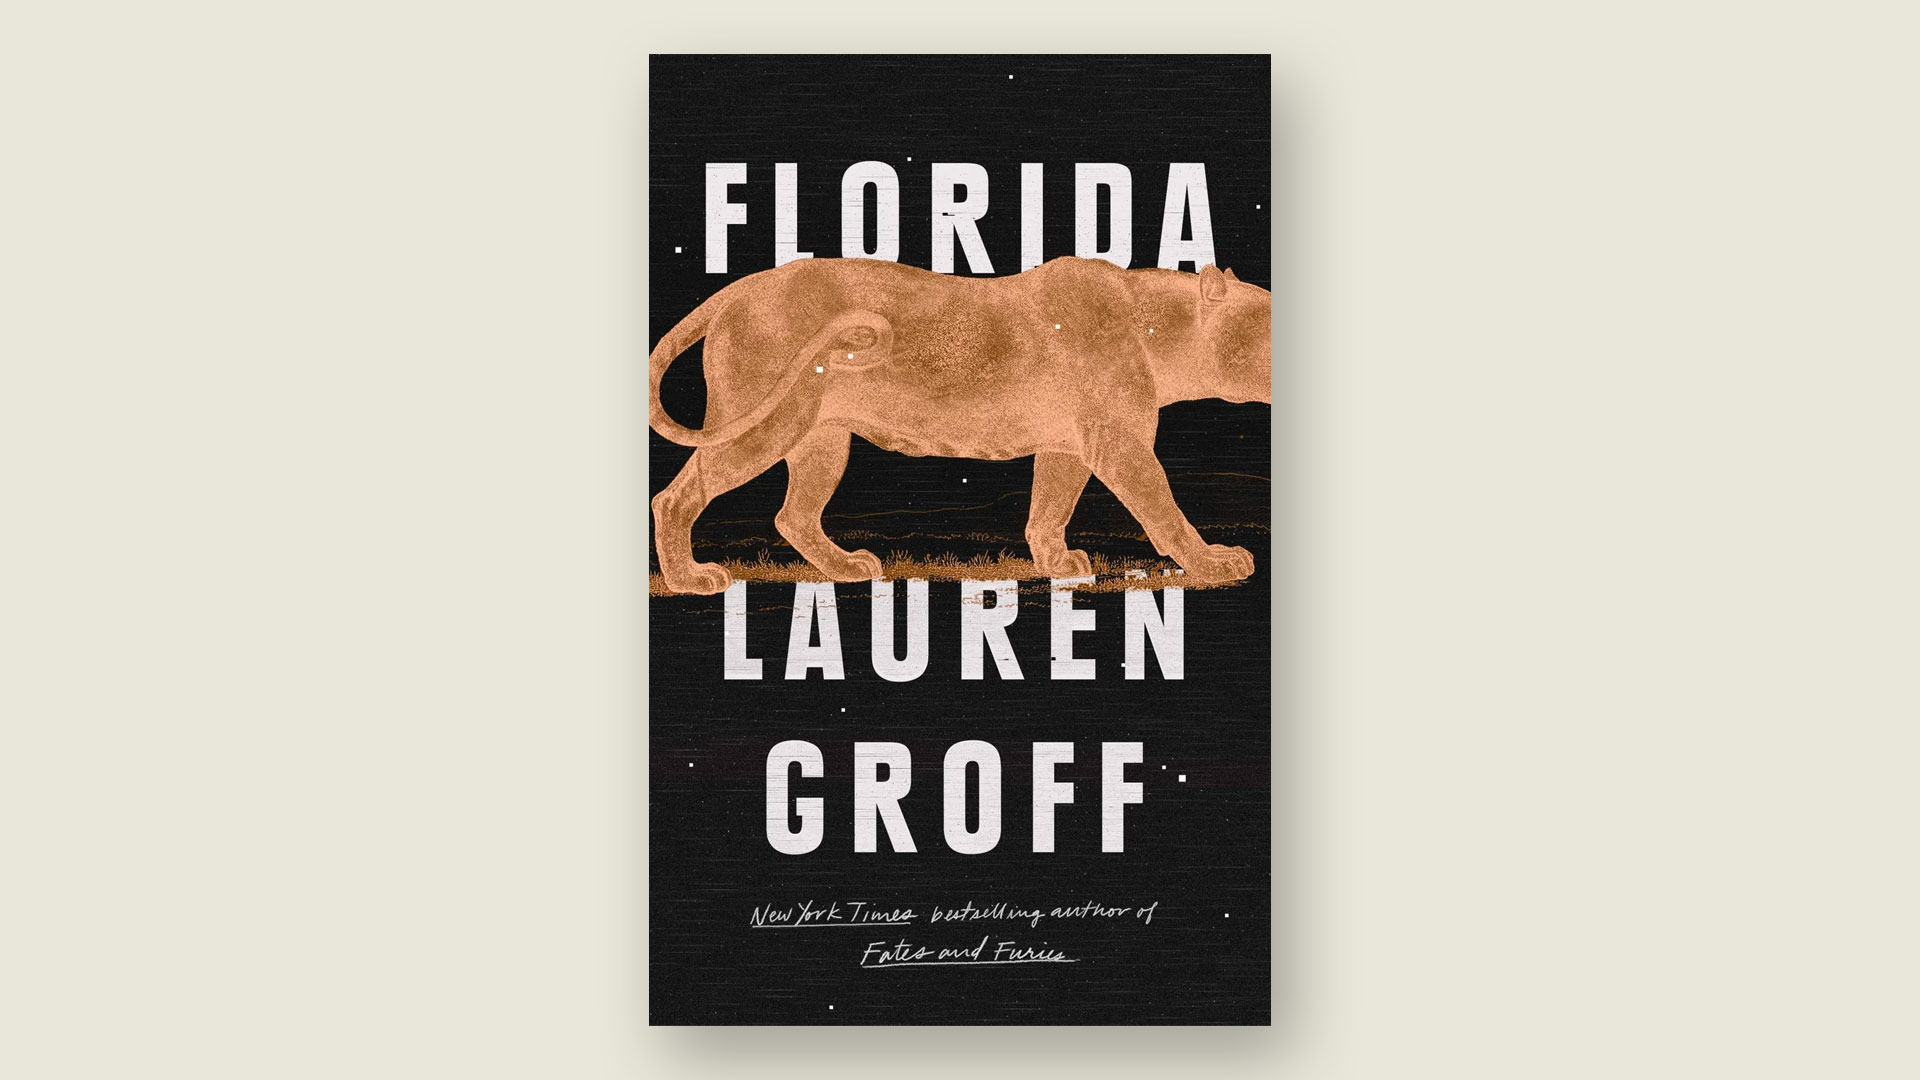 Book cover of "Florida" by Lauren Groff.